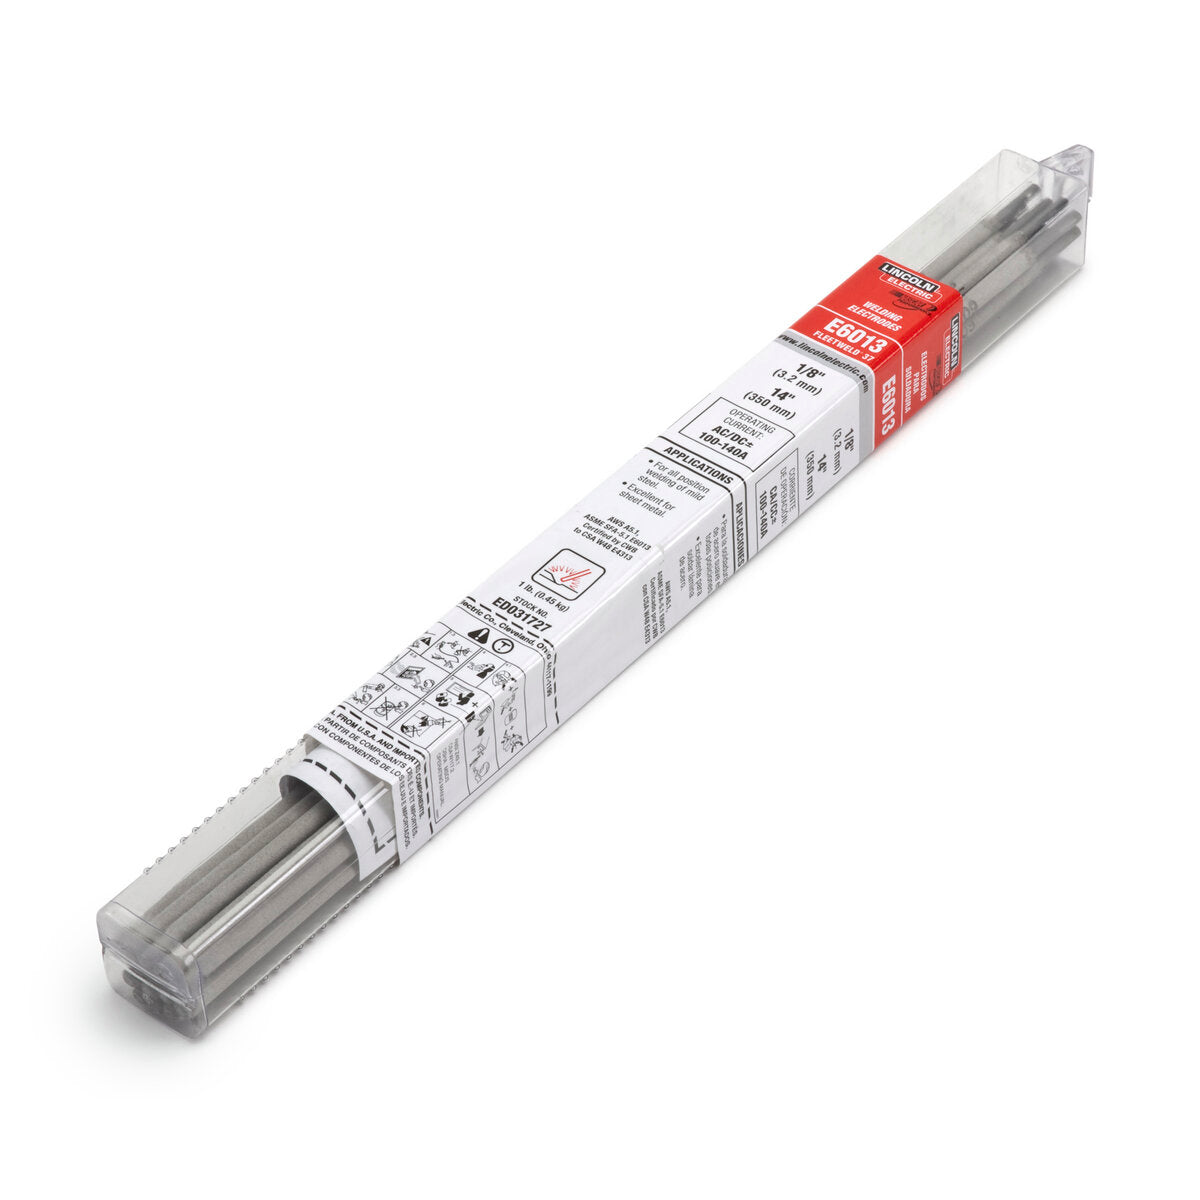 Lincoln Electric - Fleetweld® 37-RSP Stick (SMAW) Electrode, 1/8x14 in, (6) 1 lb Tube - ED033500